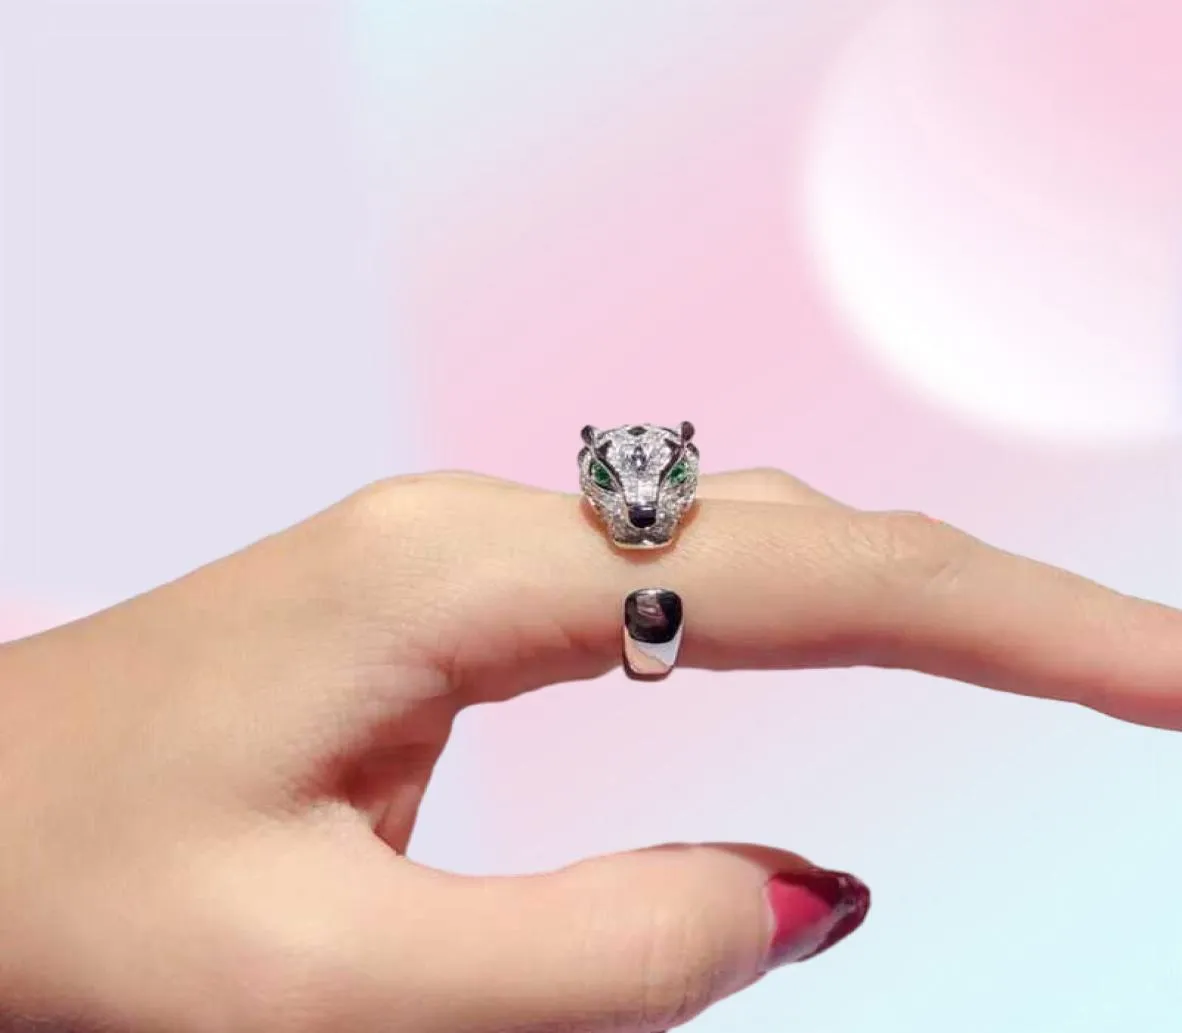 Black spot Leopard Head Rings paved 3A Cubic Zirconia Stone Animal Panther Ring Adjustable for Men Women copper Party jewelry Y0725615725